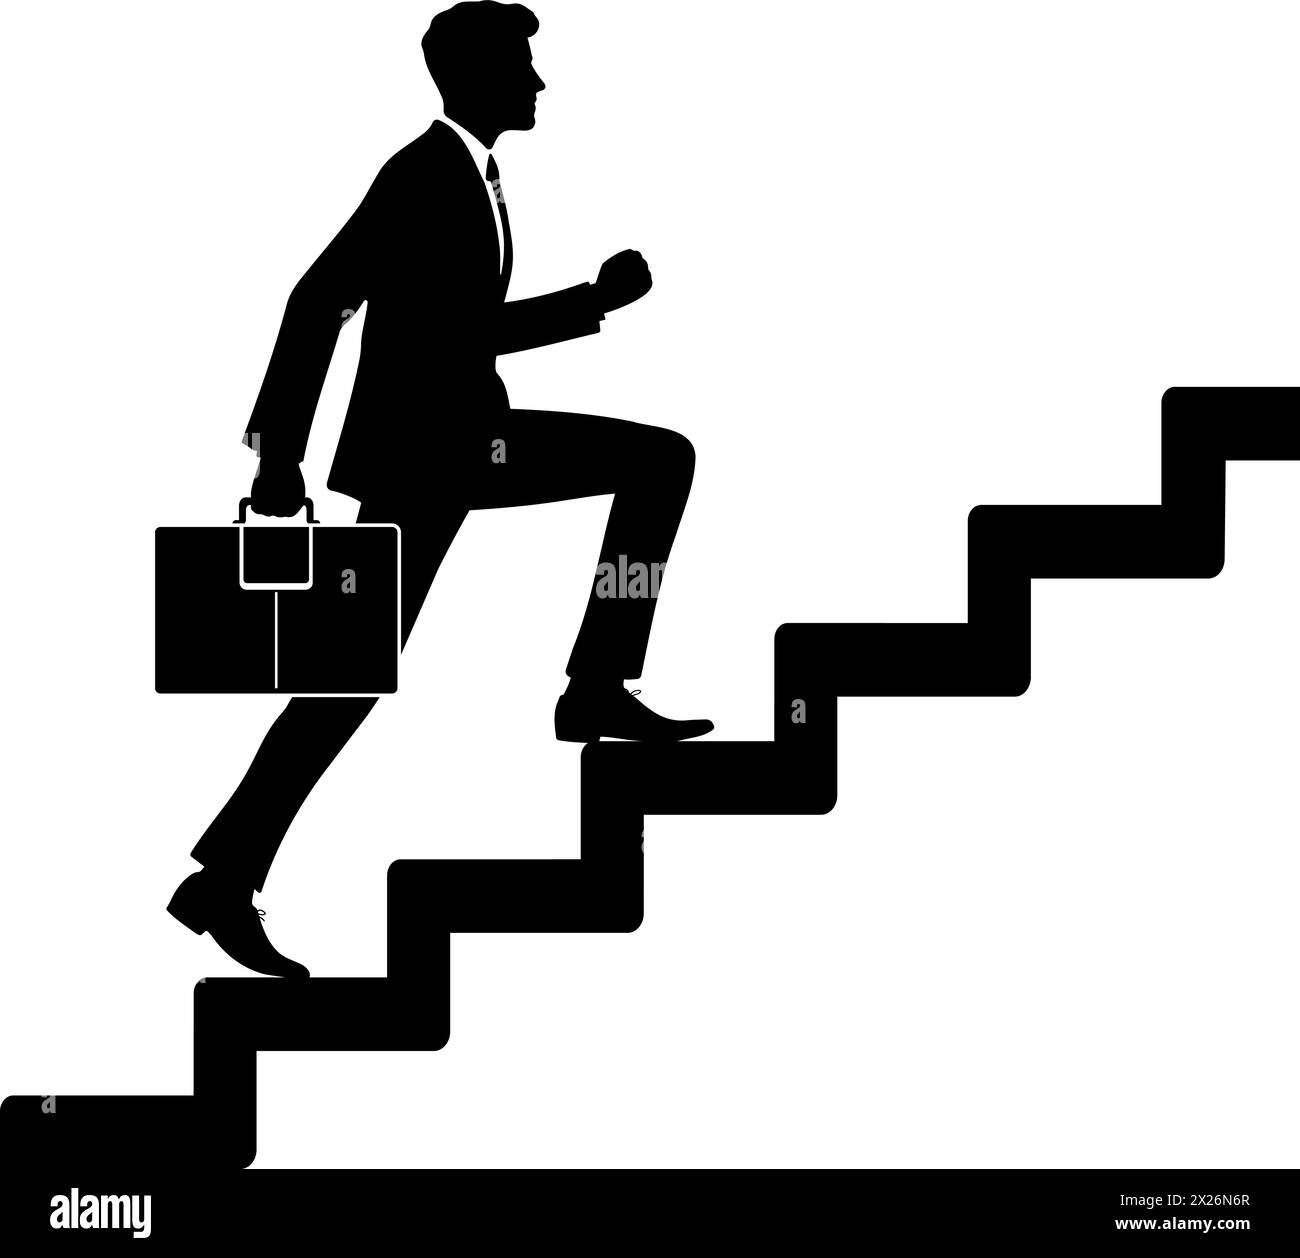 Businessman climb up stairs silhouette. Vector illustration Stock Vector